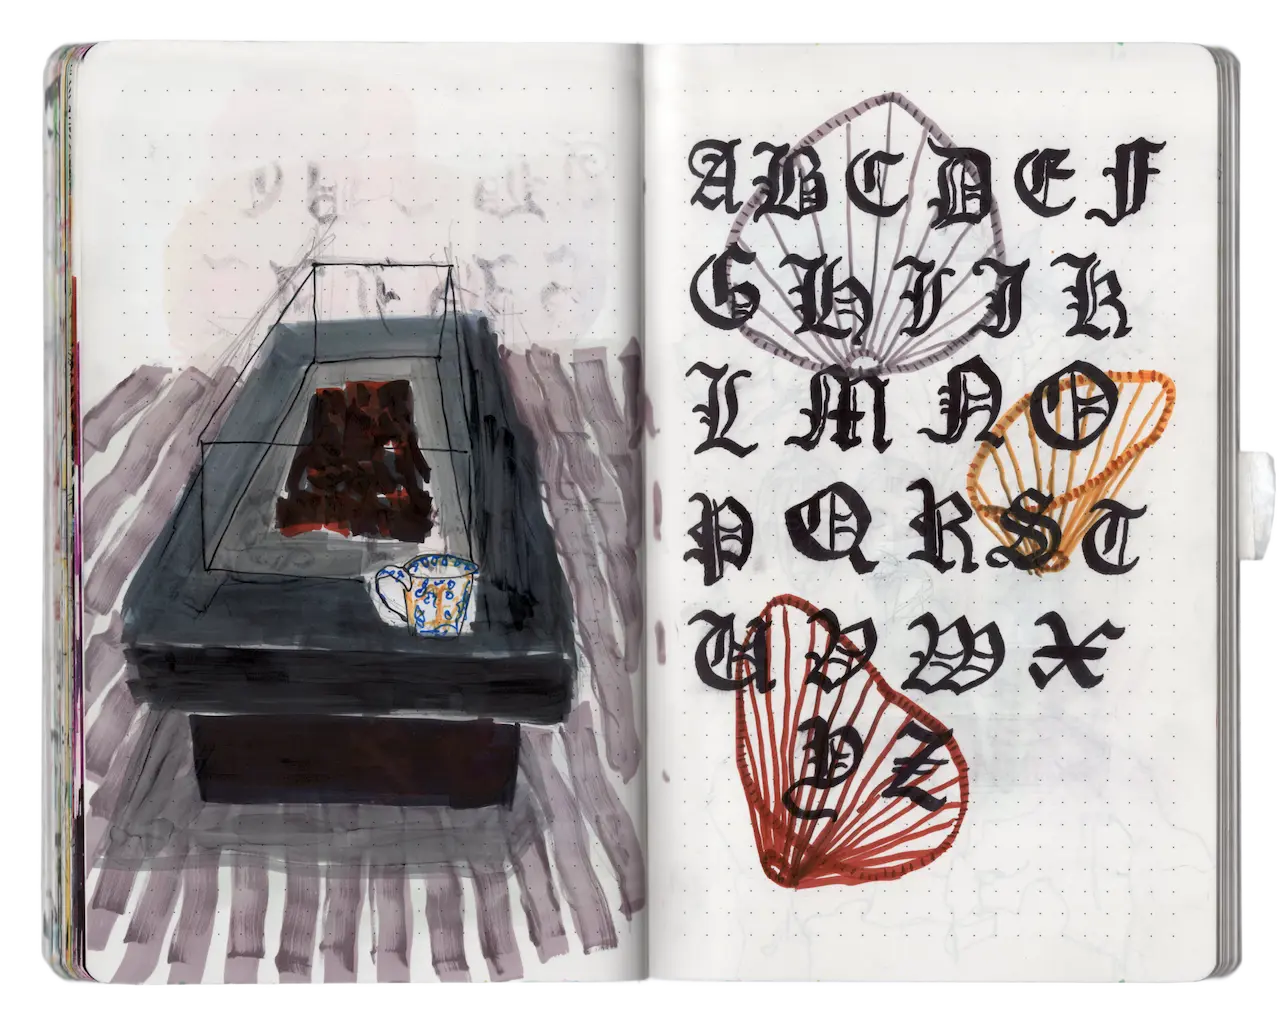 Spread from one of my drawing notebooks. On the left page is a fireplace with an Iittala coffee cup on a wooden floor. On the right page is a typographic exploration of blackletter font forms superimposed on top of quick sketches of a couple wire lawn chairs.